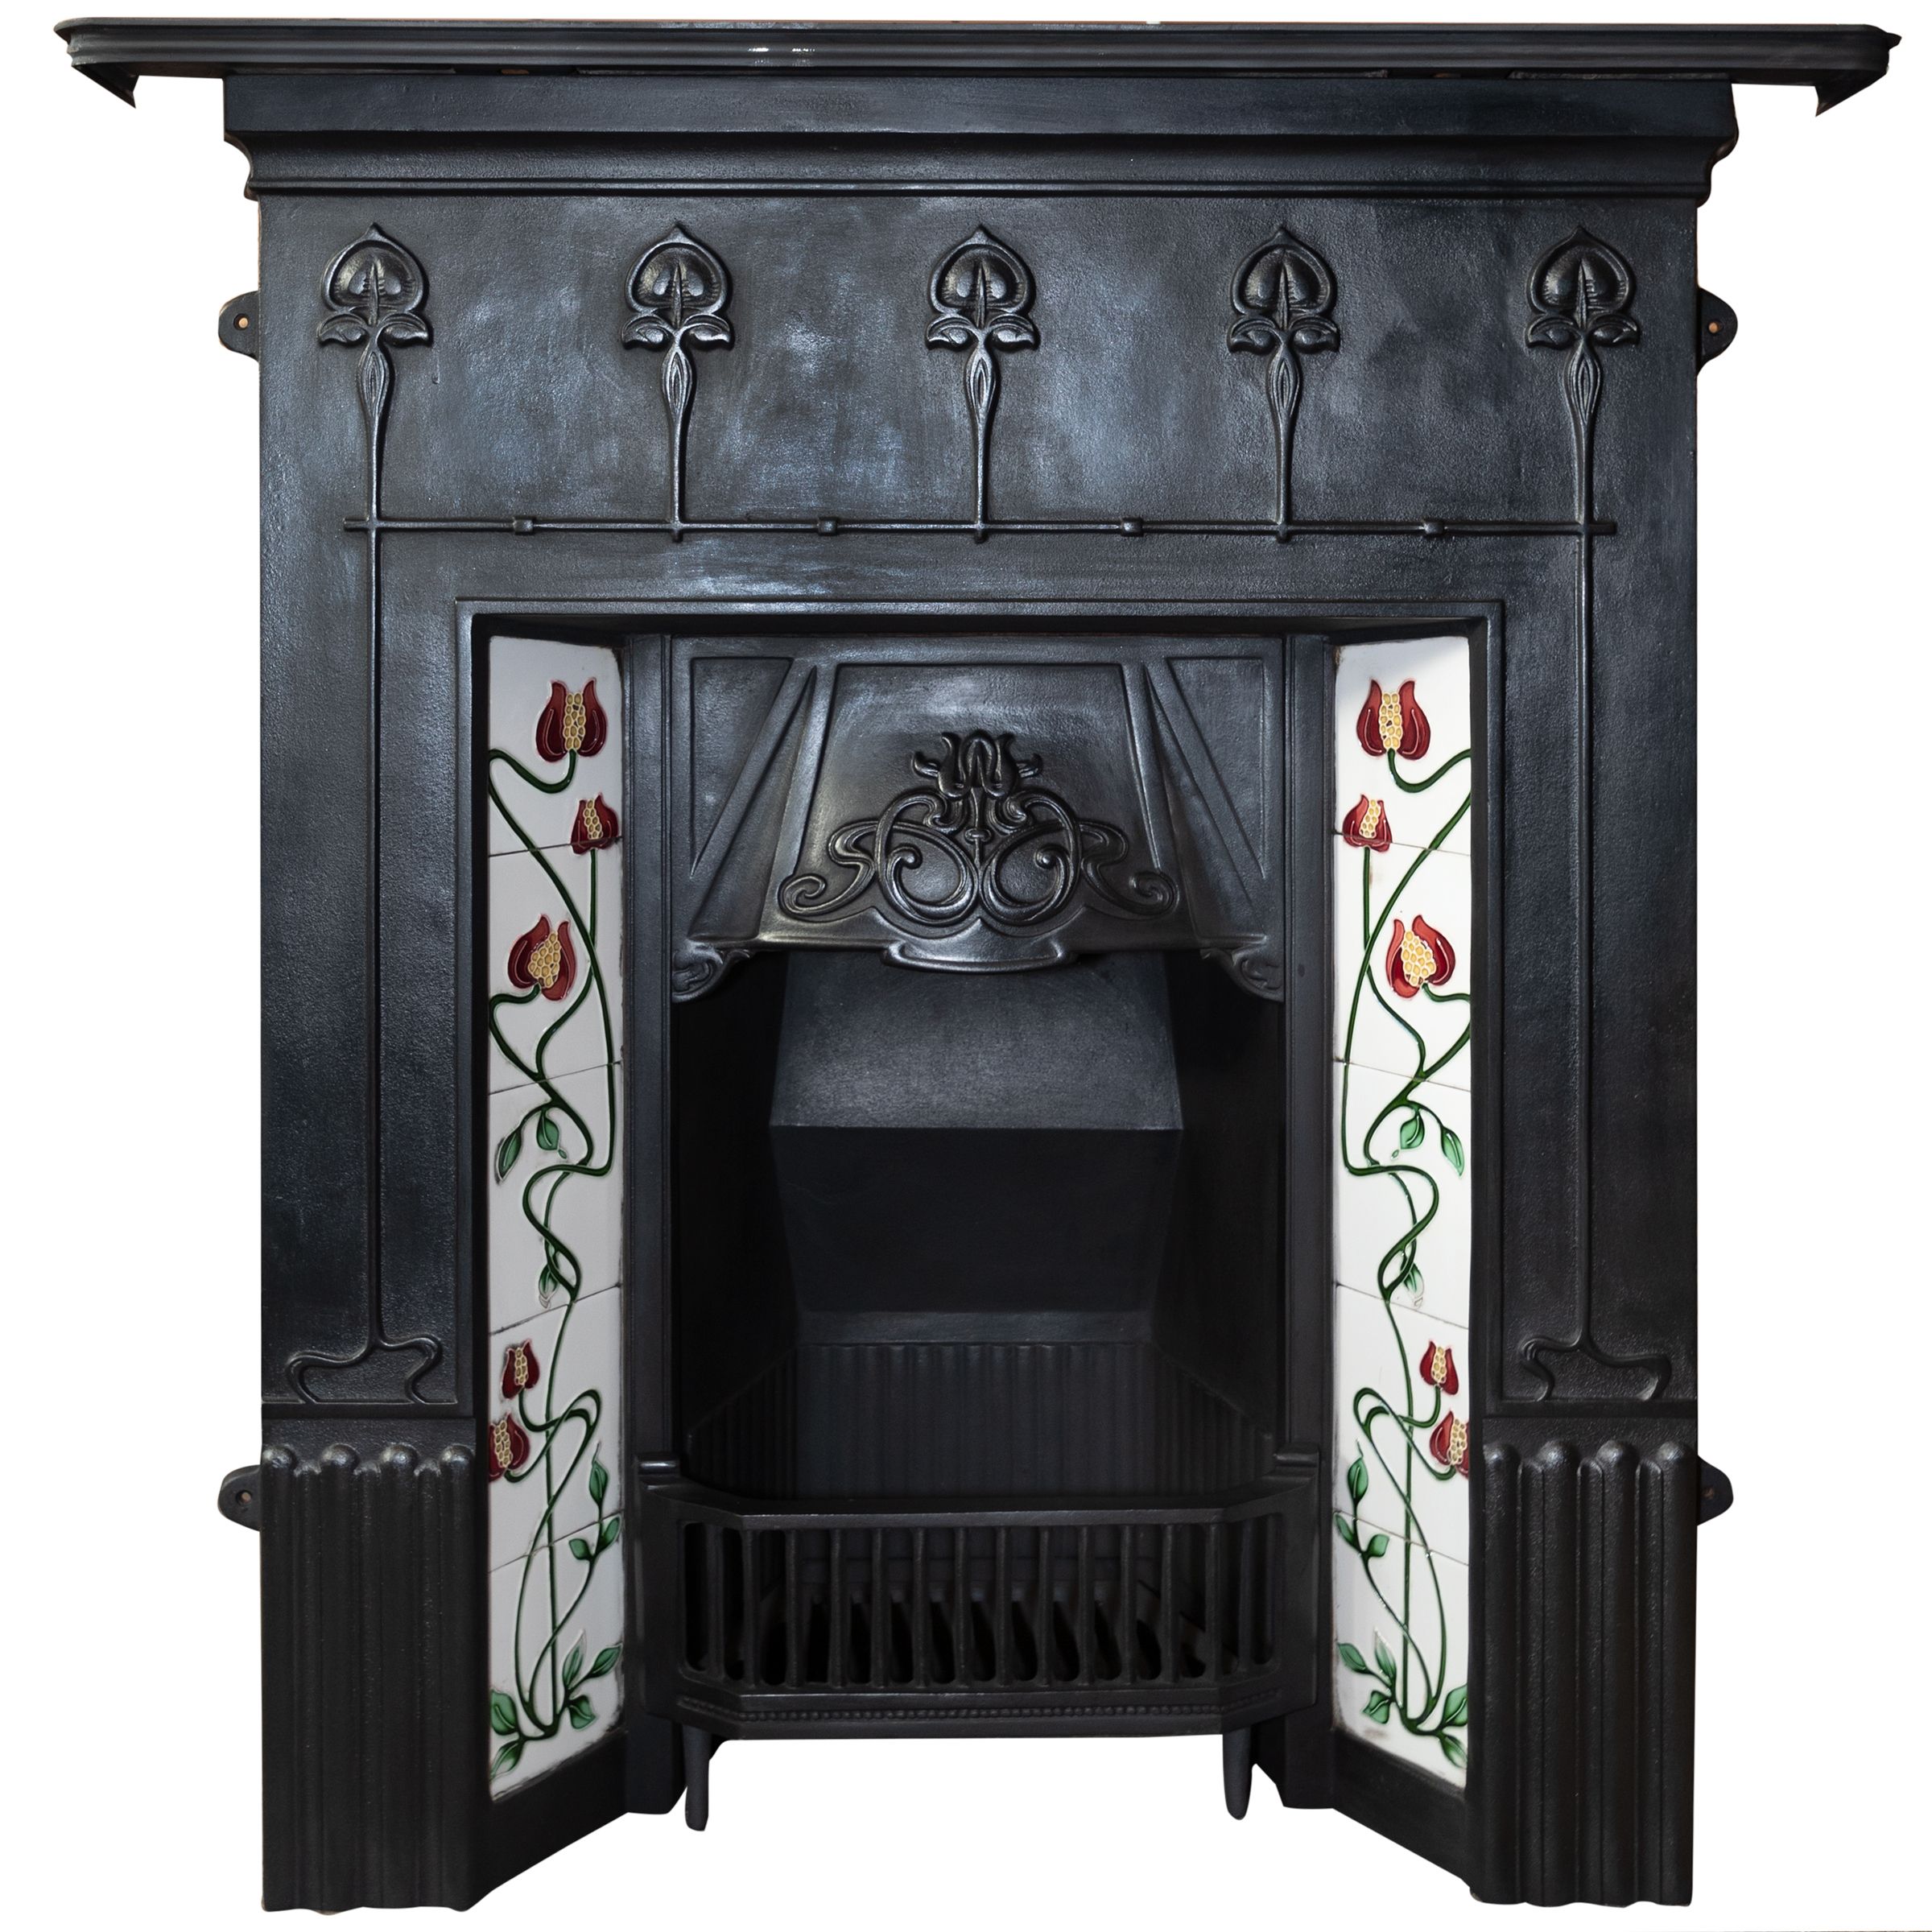 Ornate Fireplace Beautiful Huge Selection Of Antique Cast Iron Fireplaces Fully